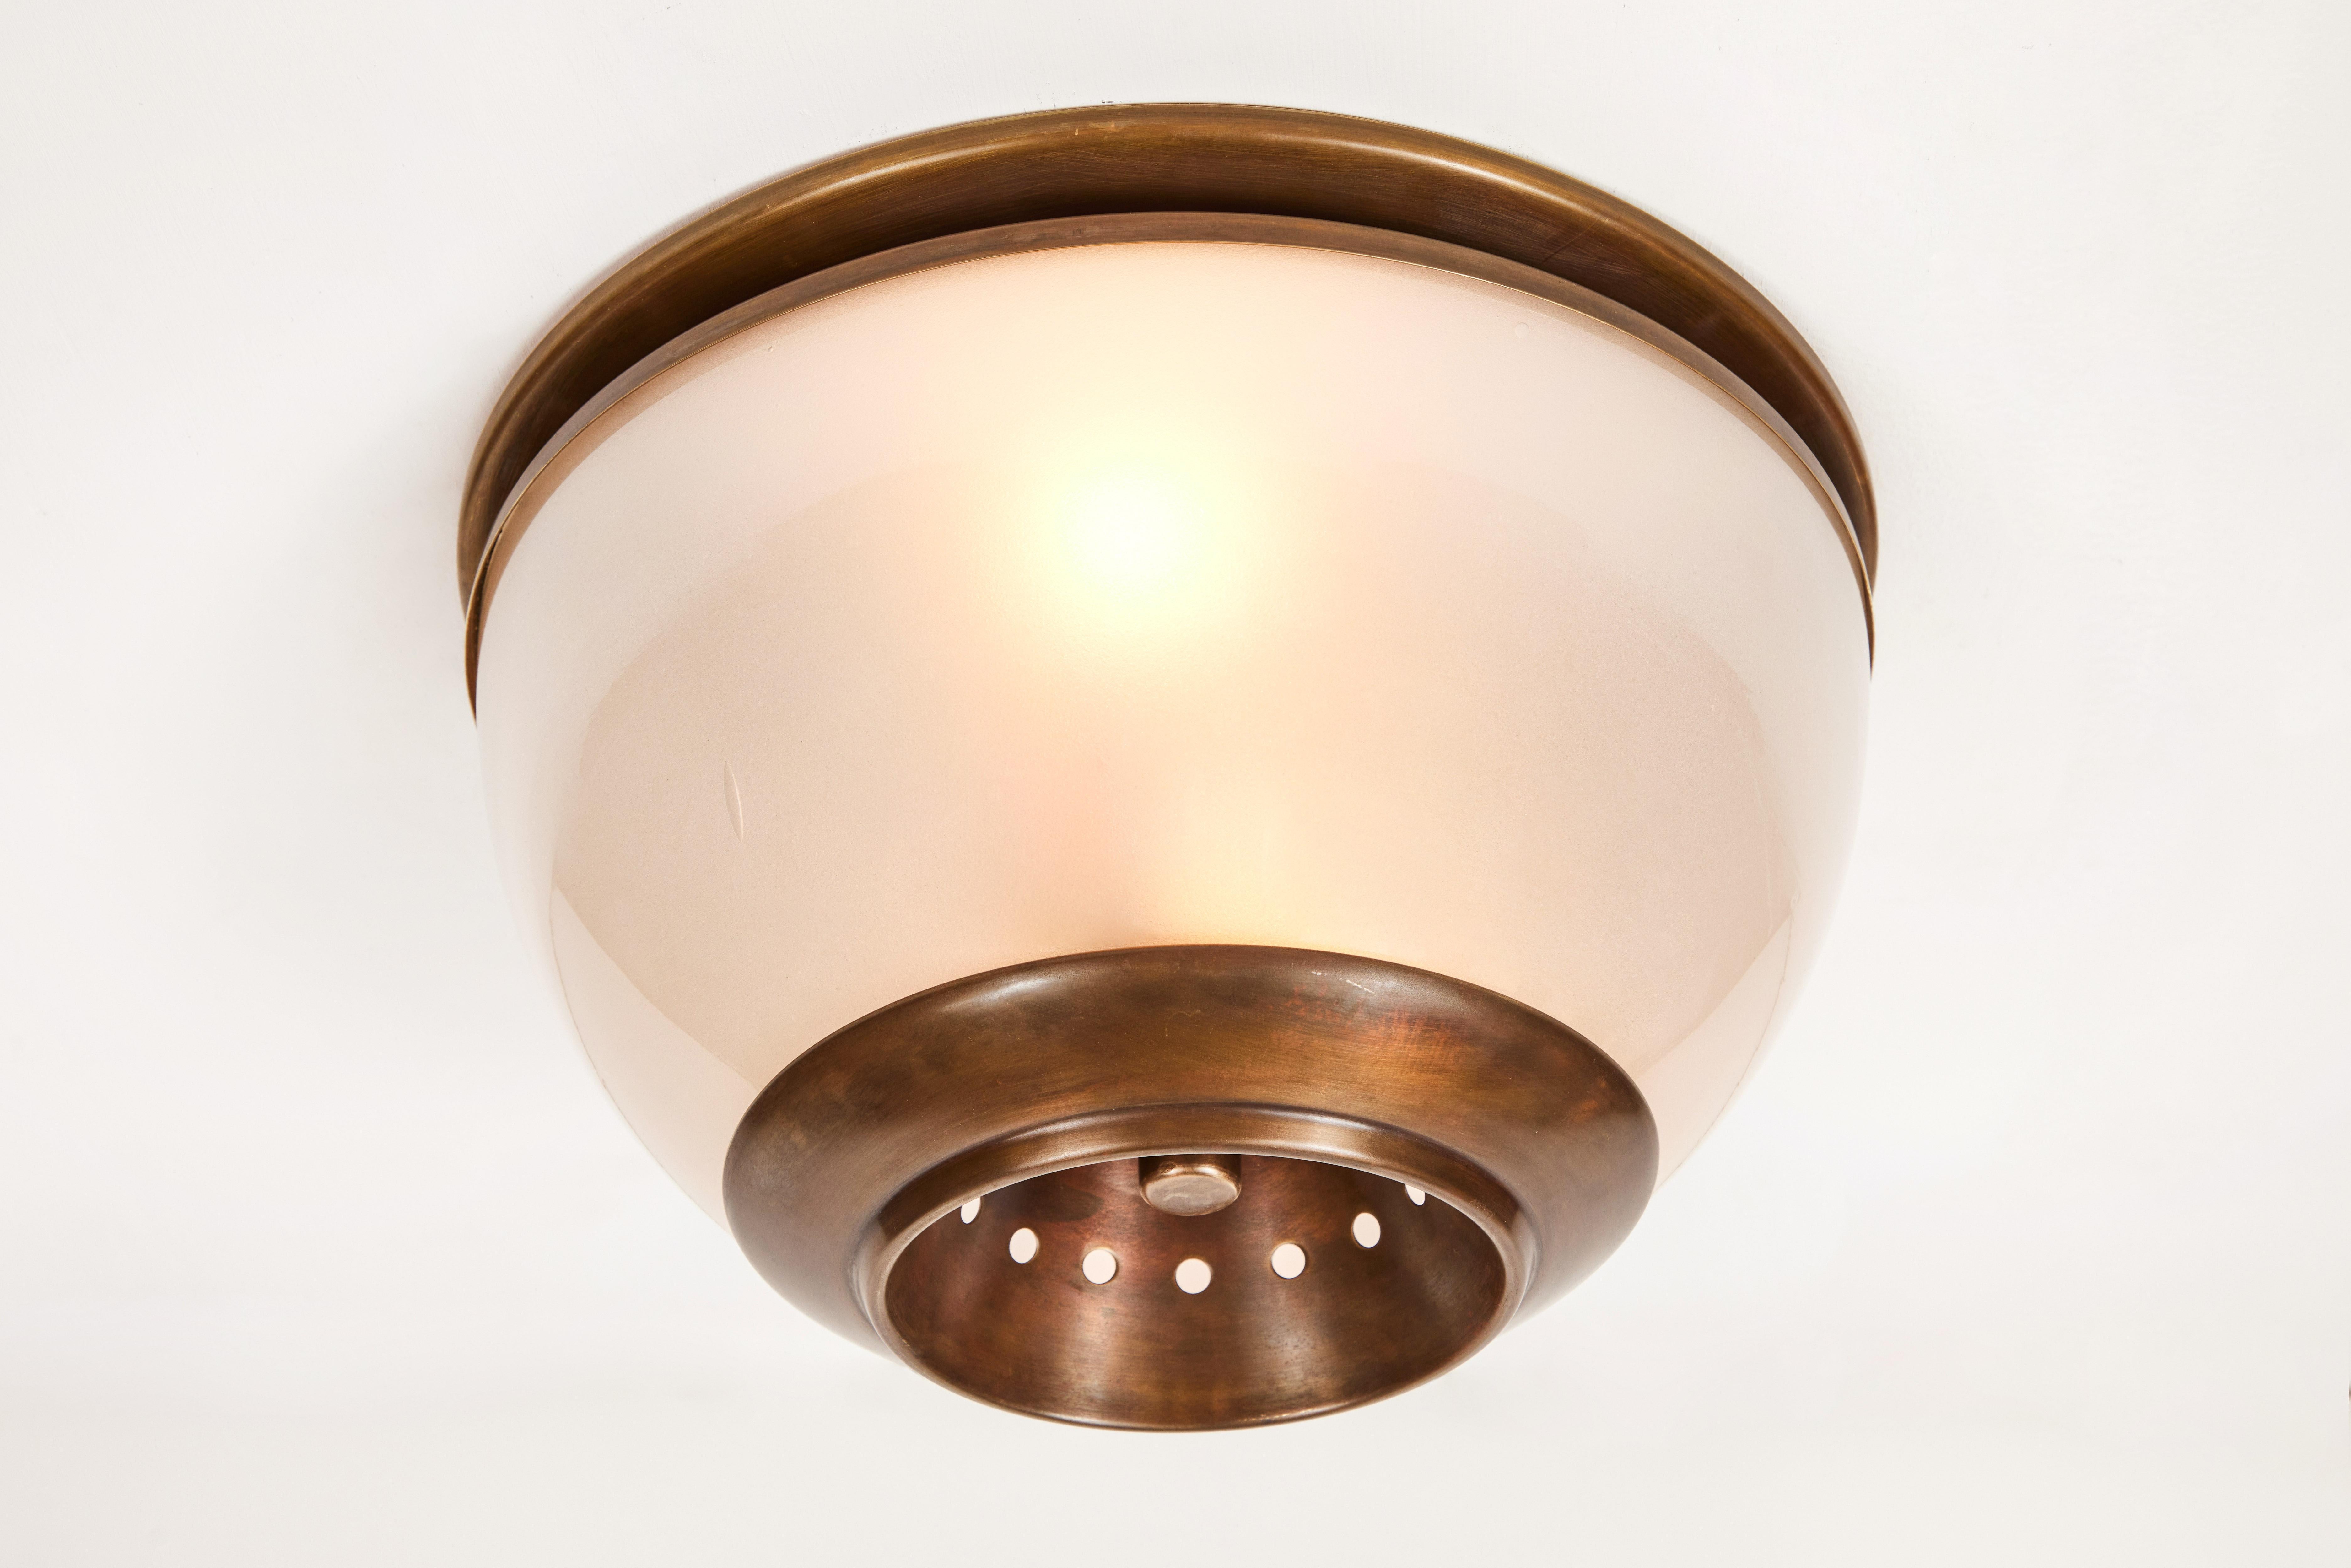 1960s Luigi Caccia Dominioni LSP3 ceiling or wall light for Azucena. Executed in blown opaline glass and patinated brass. 

Azucena was one of the most innovative lighting design companies in Italy during the midcentury era. Their designs have